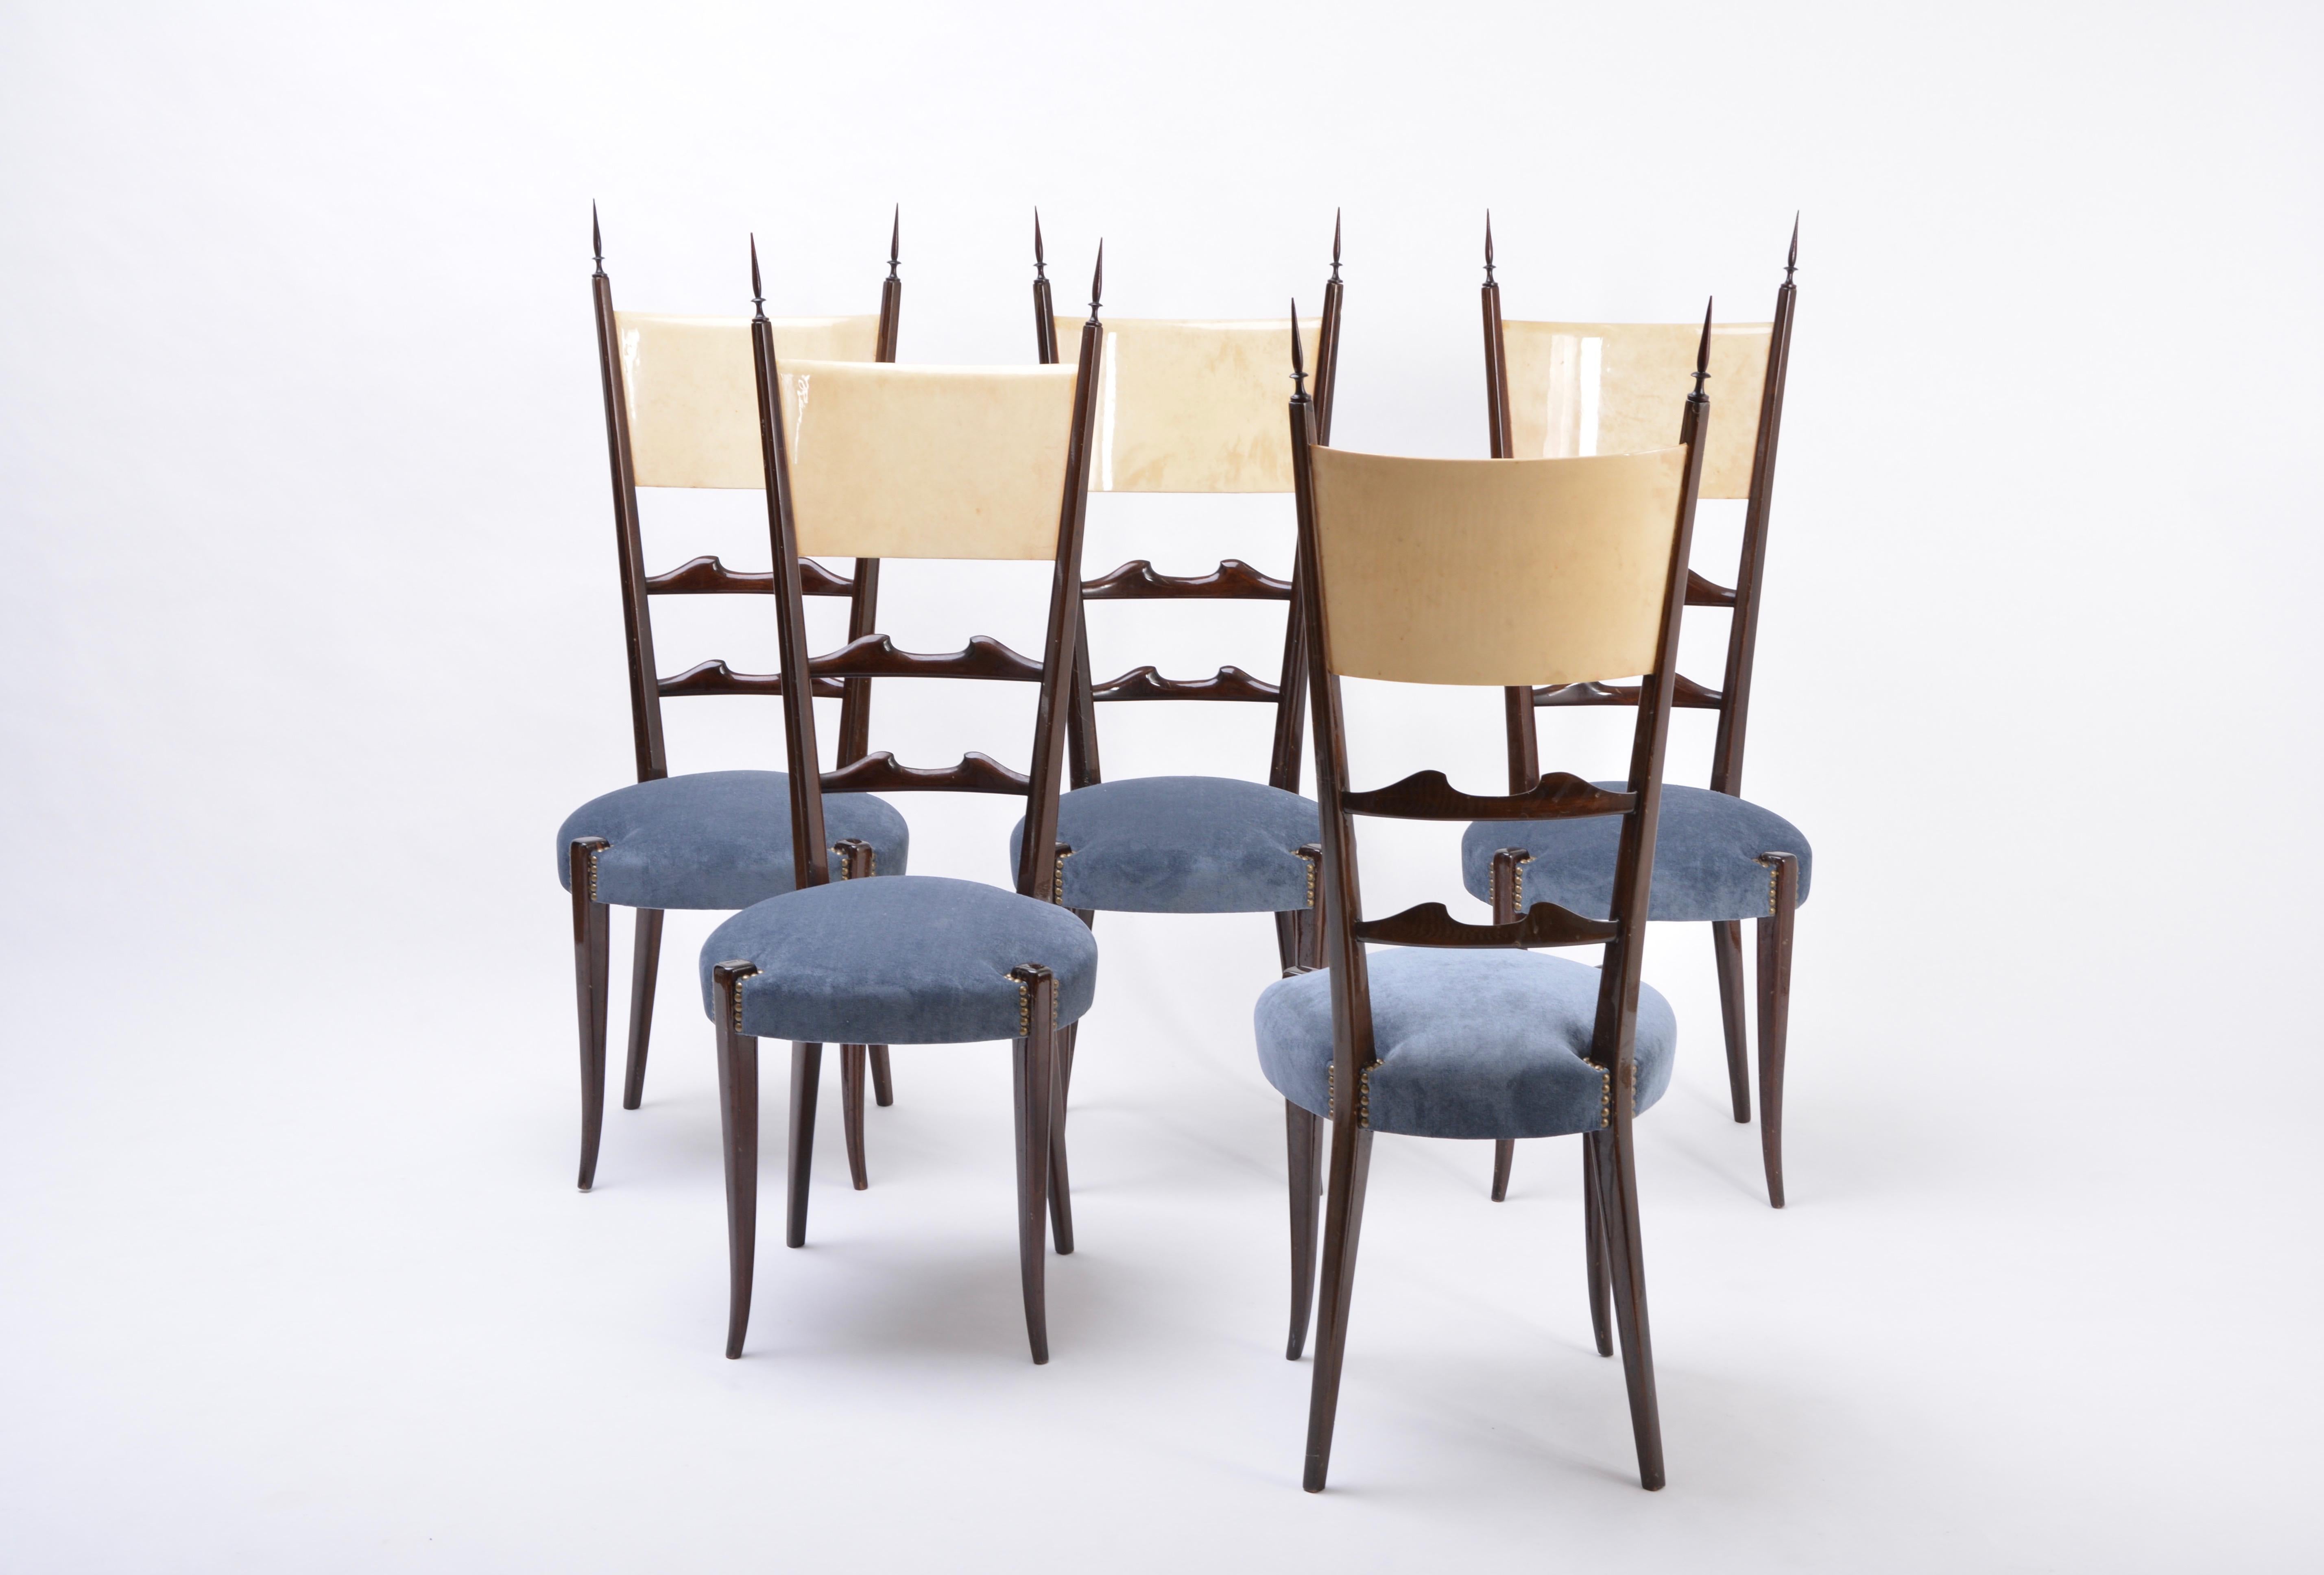 20th Century Set of five Italian Mid-Century Modern high back dining chairs by Aldo Tura